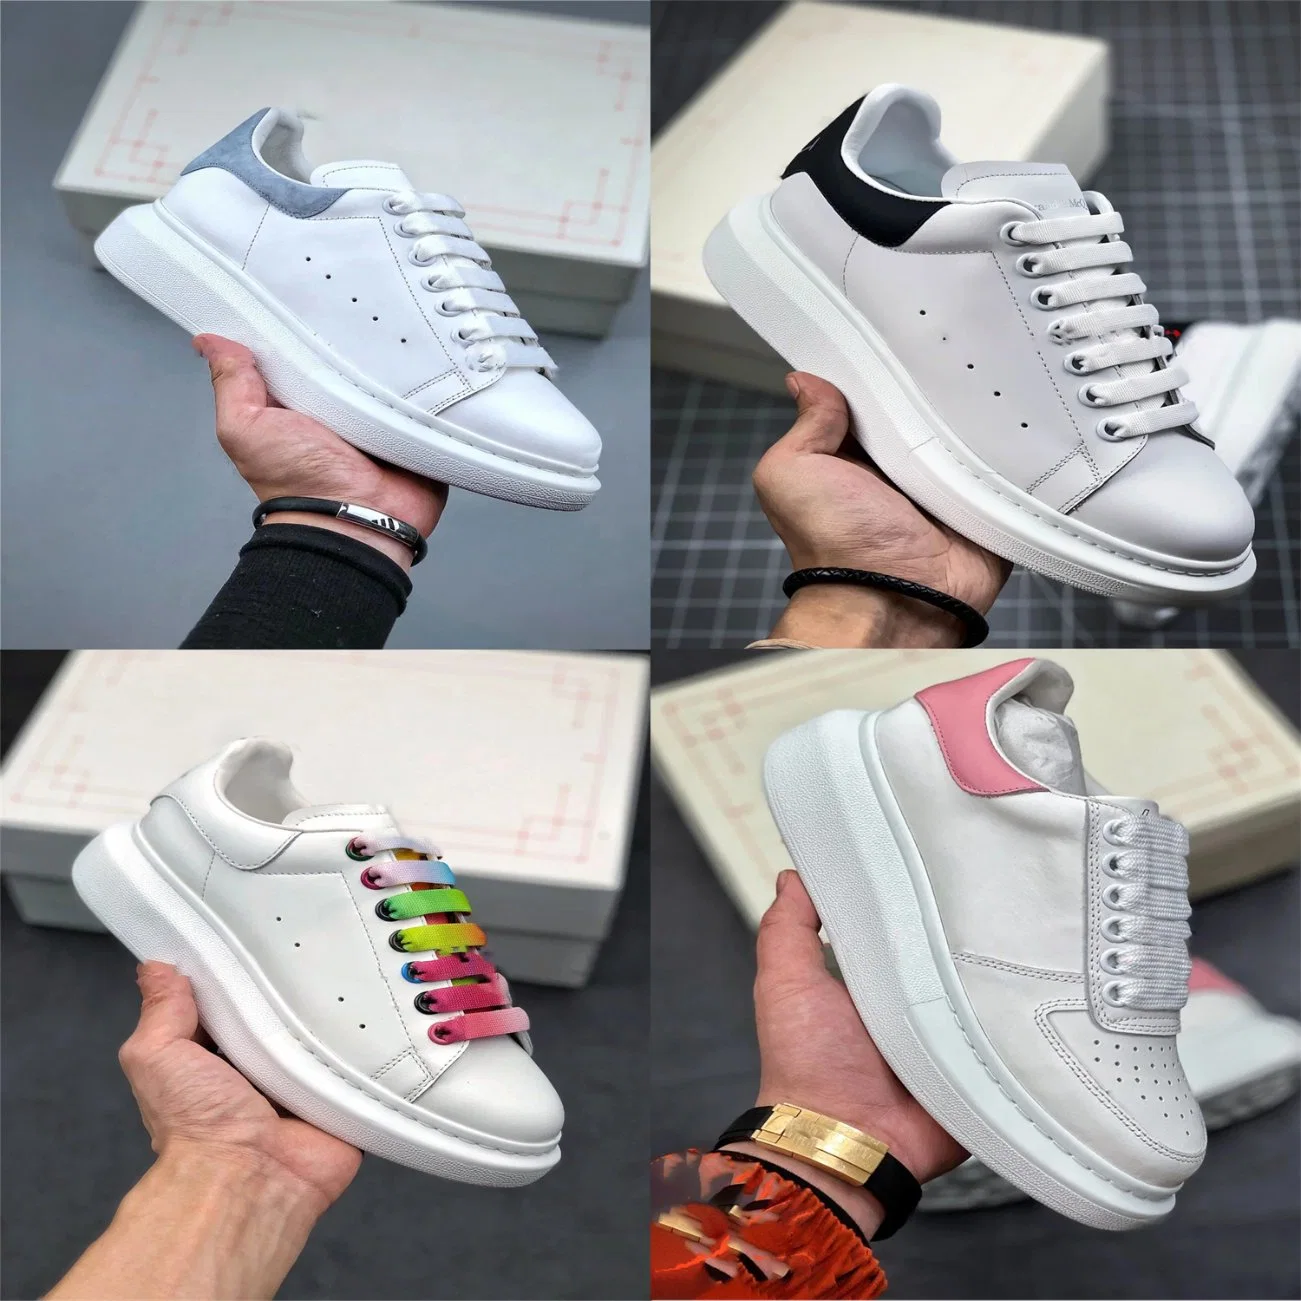 Cheap Designer Fashions Ale-Xander Mc-Queen Colors Rainbow Leather Chunky Athletic Casual Putian Shoes